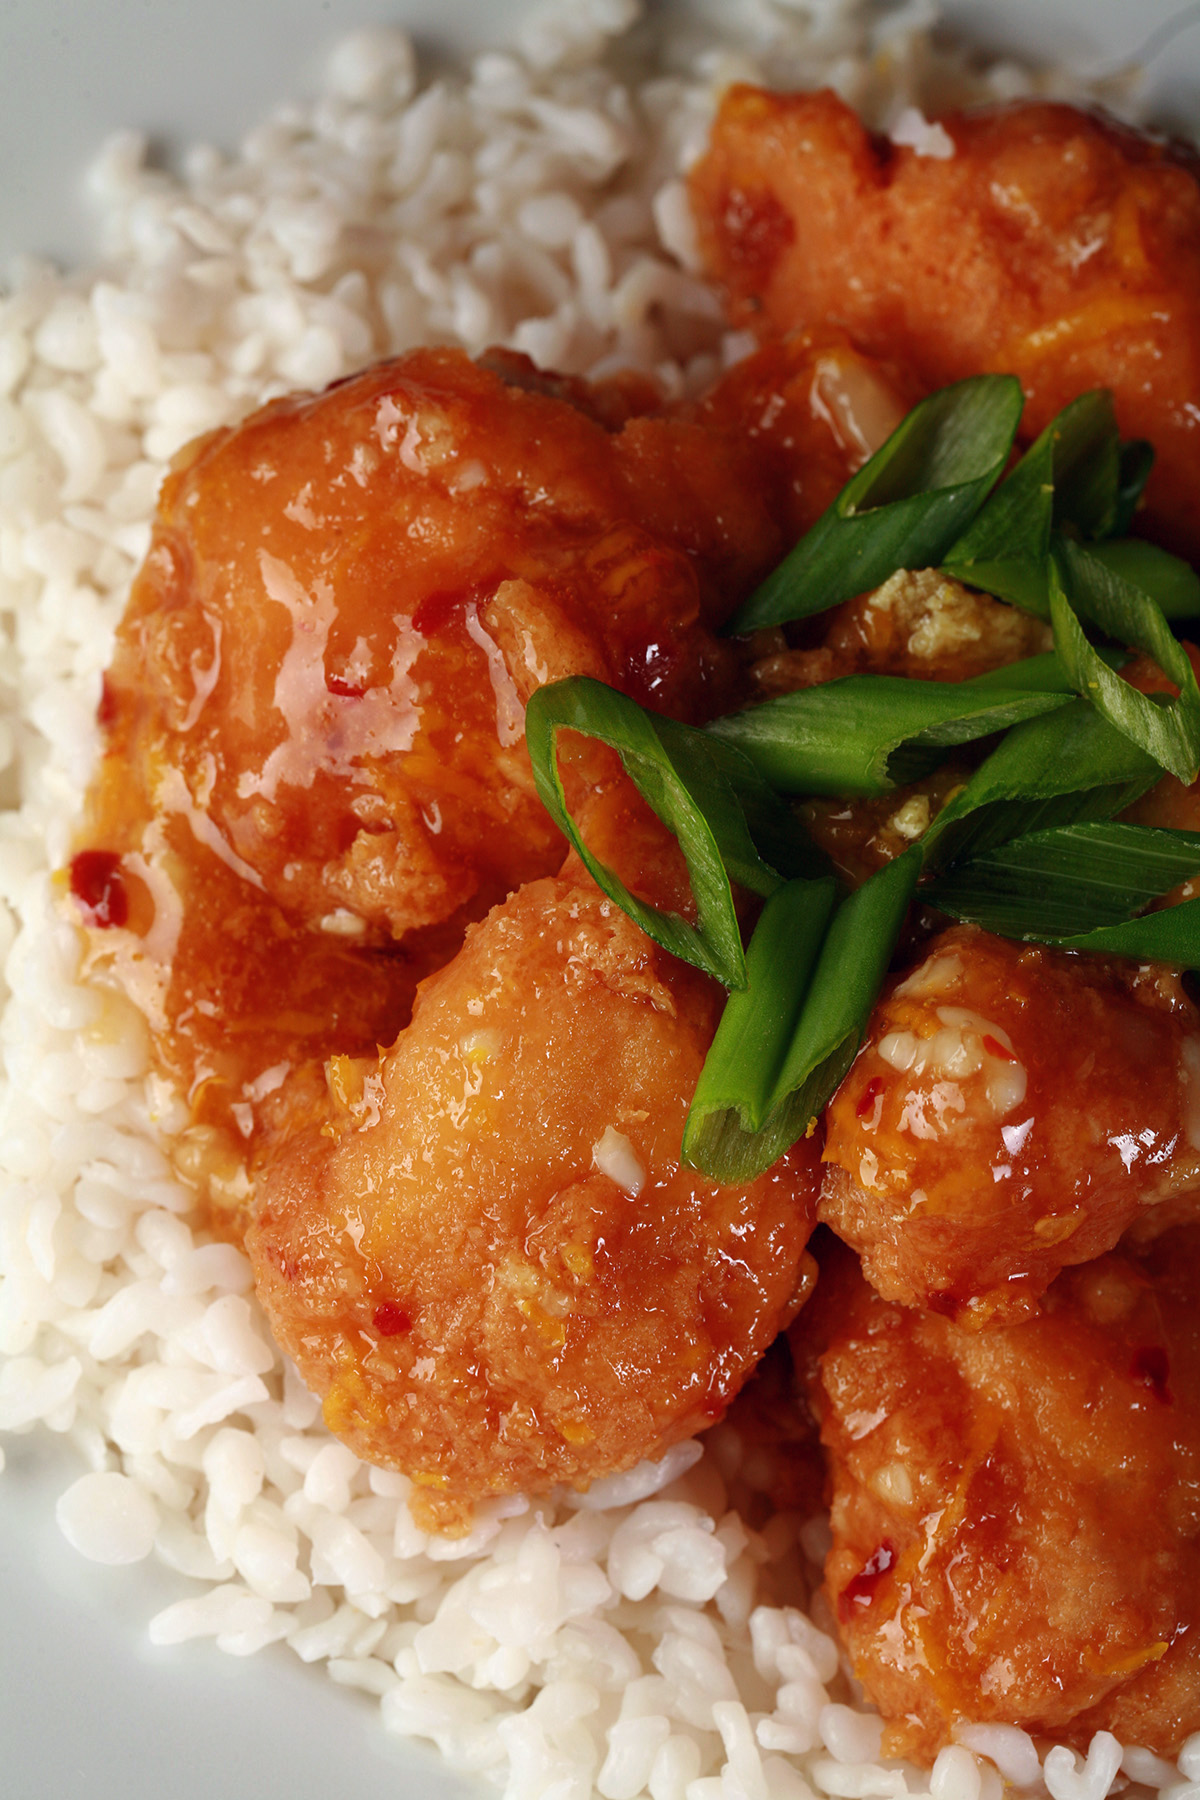 A plate of low carb spicy orange chicken served on konjac rice.